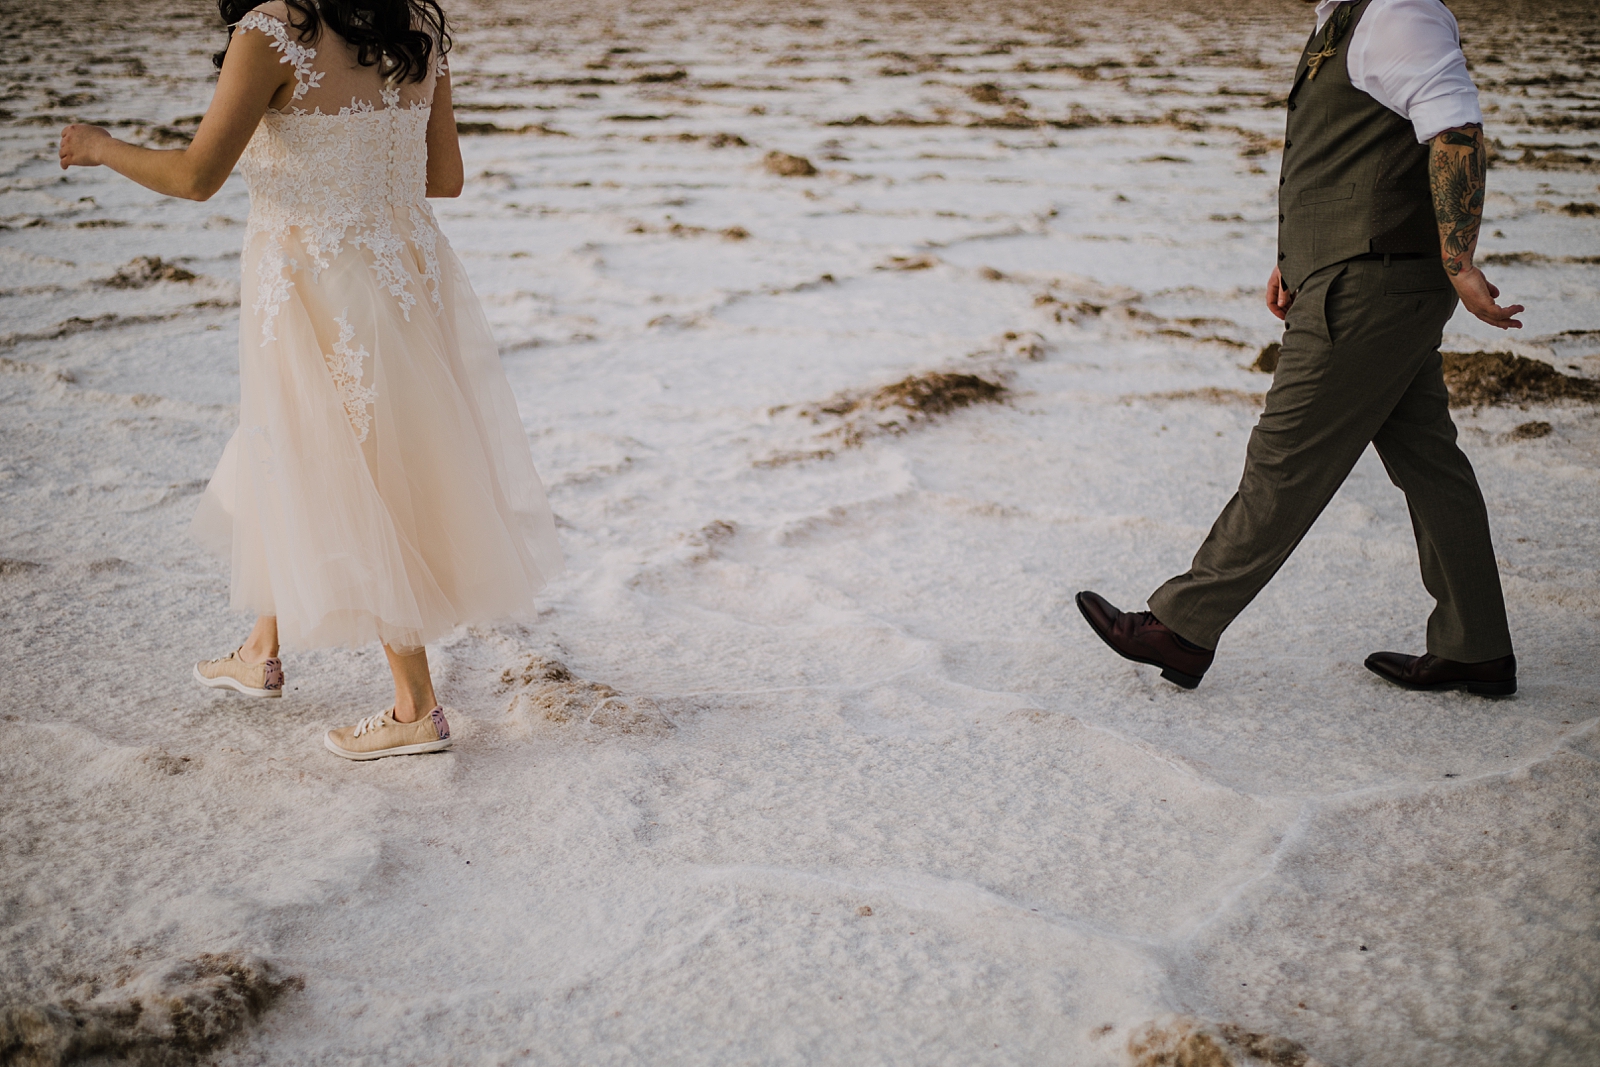 walking on the salt flats, death valley national park elopement, elope in death valley, badwater basin elopement, hiking in death valley national park, sunset at badwater basin